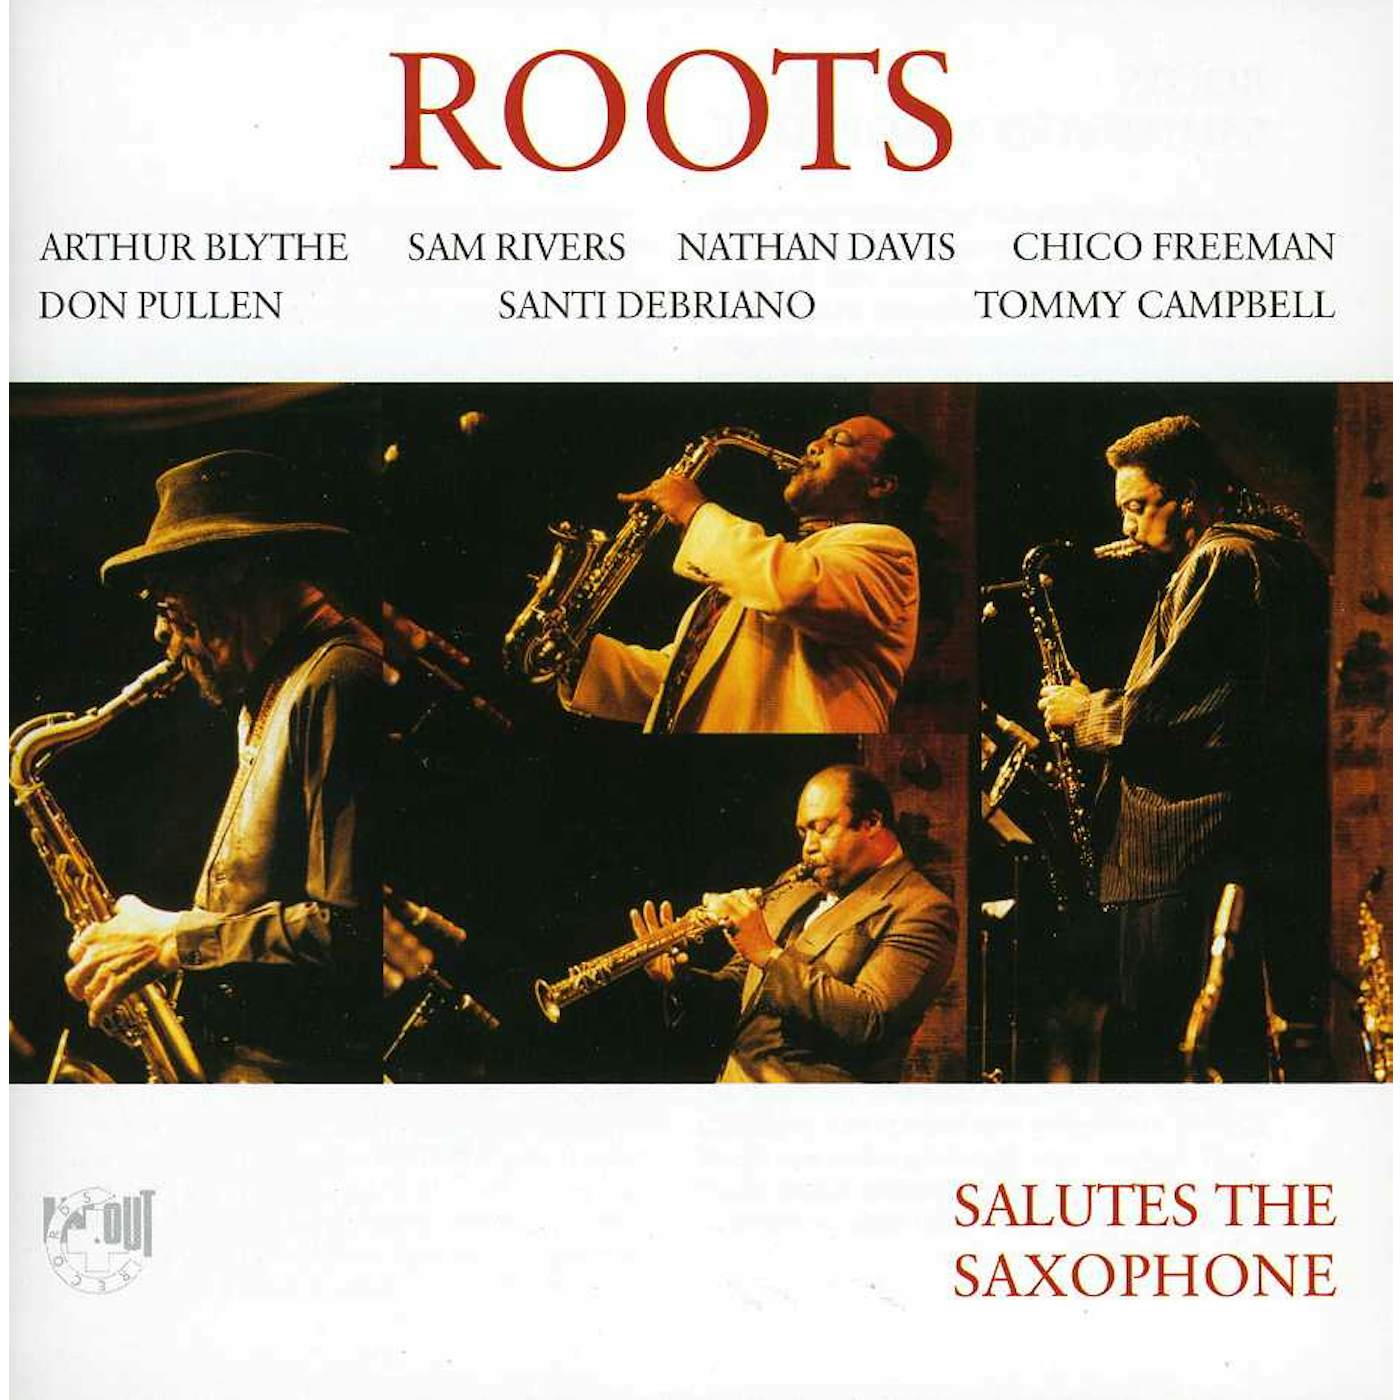 The Roots SALUTES THE SAXOPHONE CD